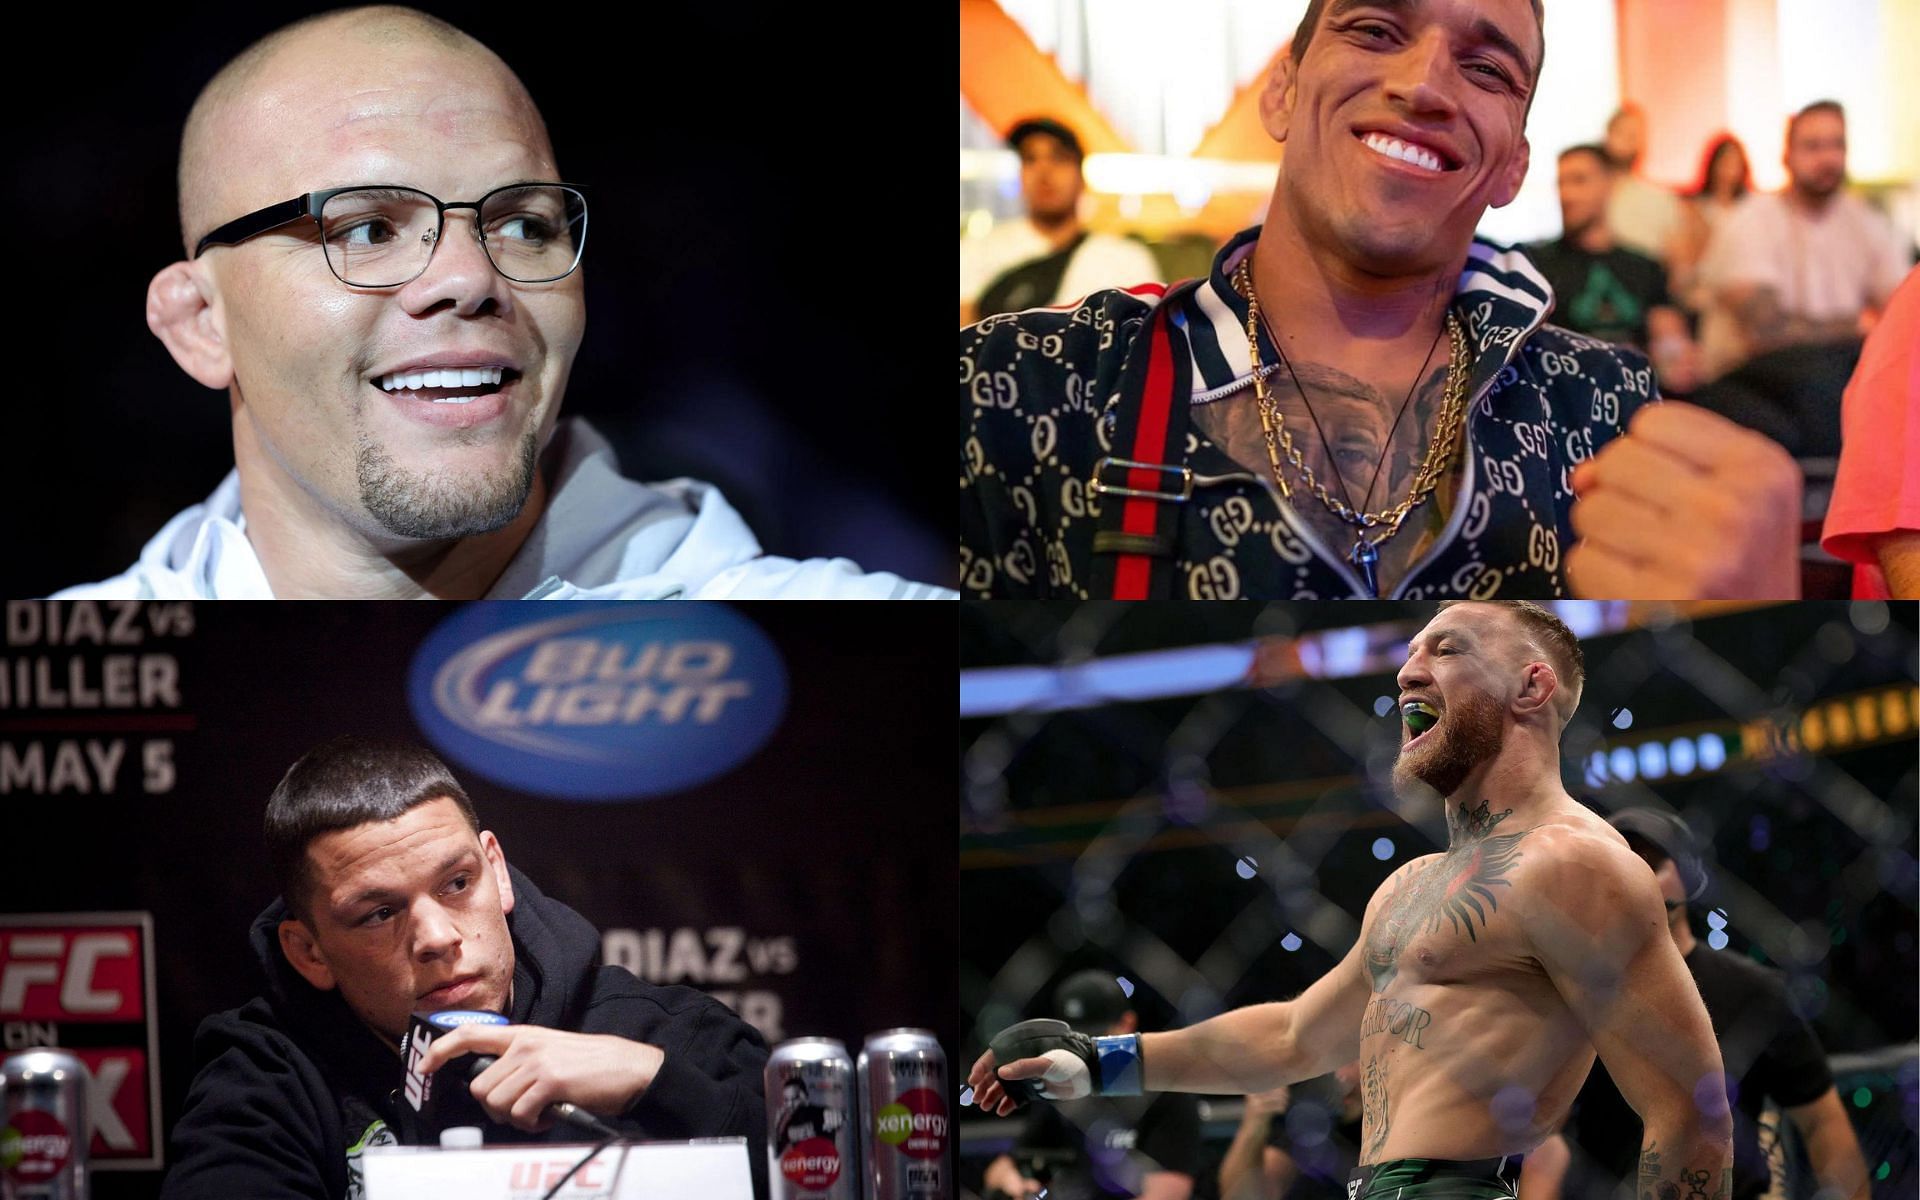 Anthony Smith (top left), Charles Oliveira (top right), Nate Diaz (bottom left), and Conor McGregor (bottom right) [Images courtesy of Getty]